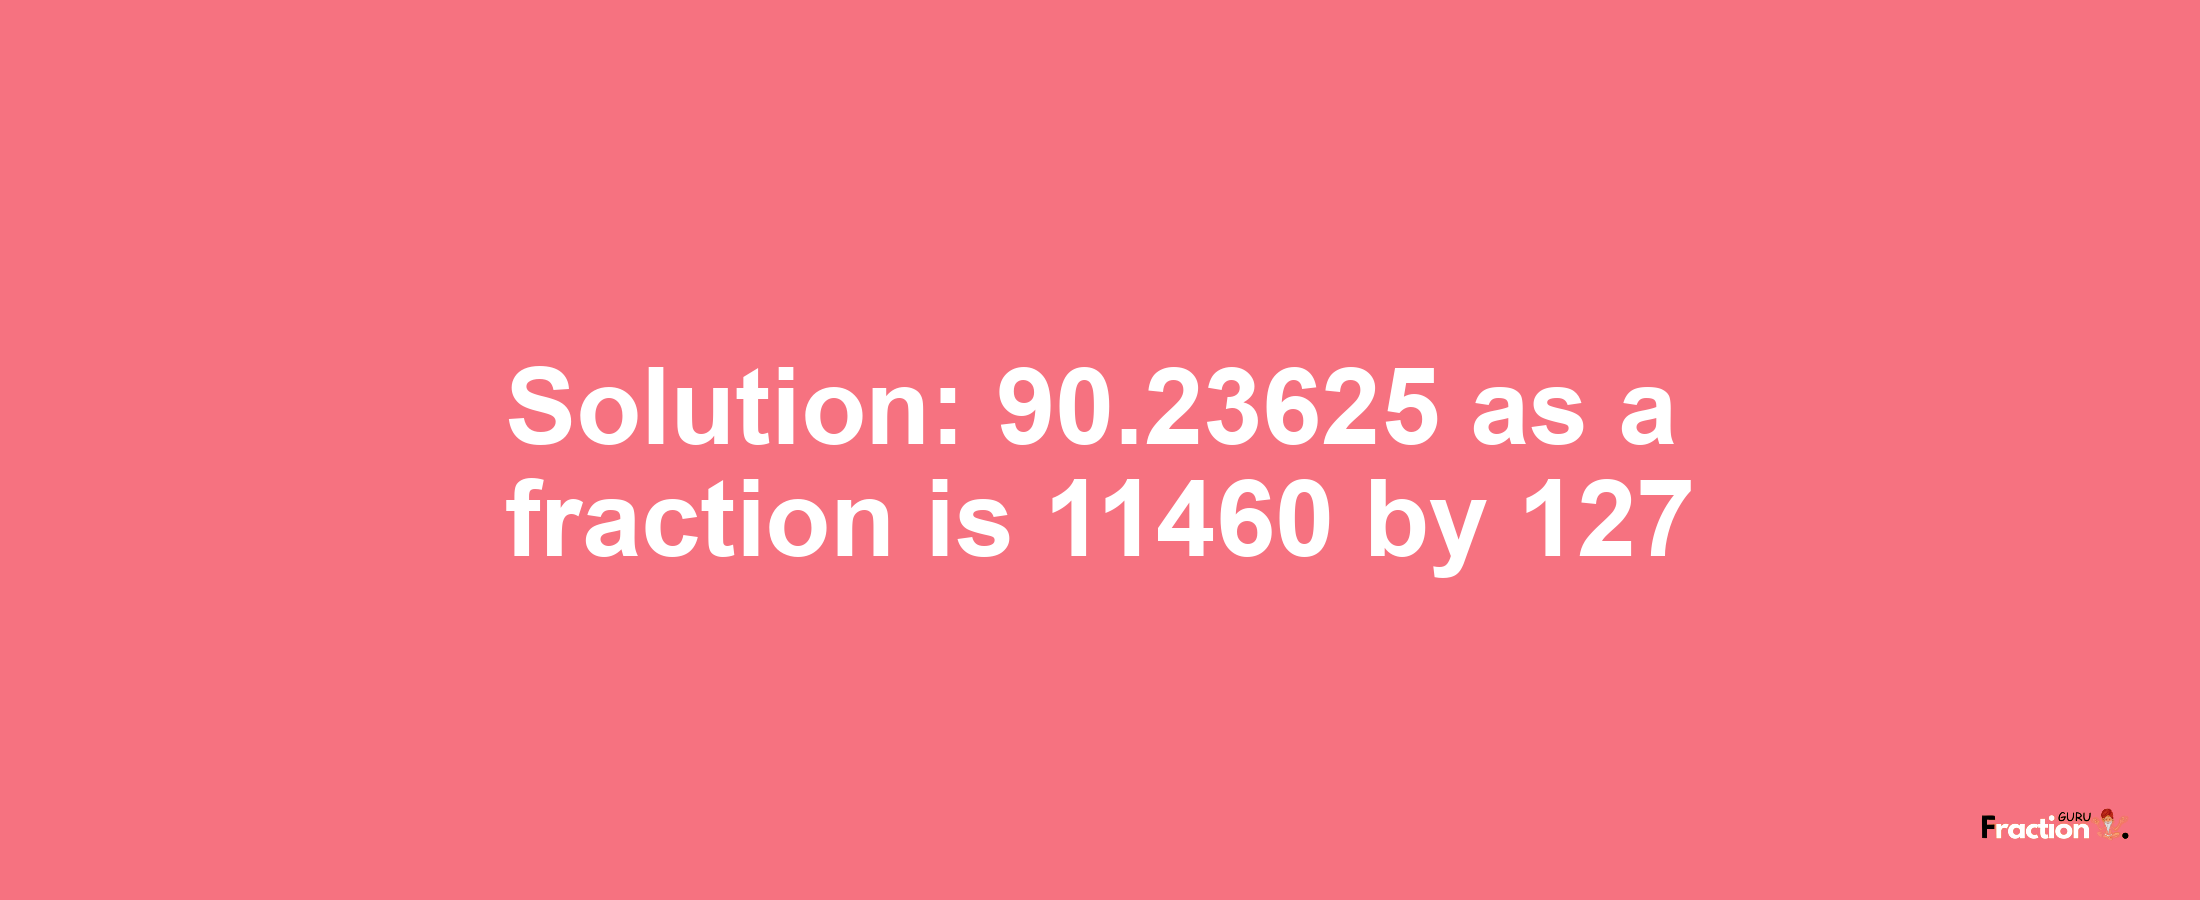 Solution:90.23625 as a fraction is 11460/127